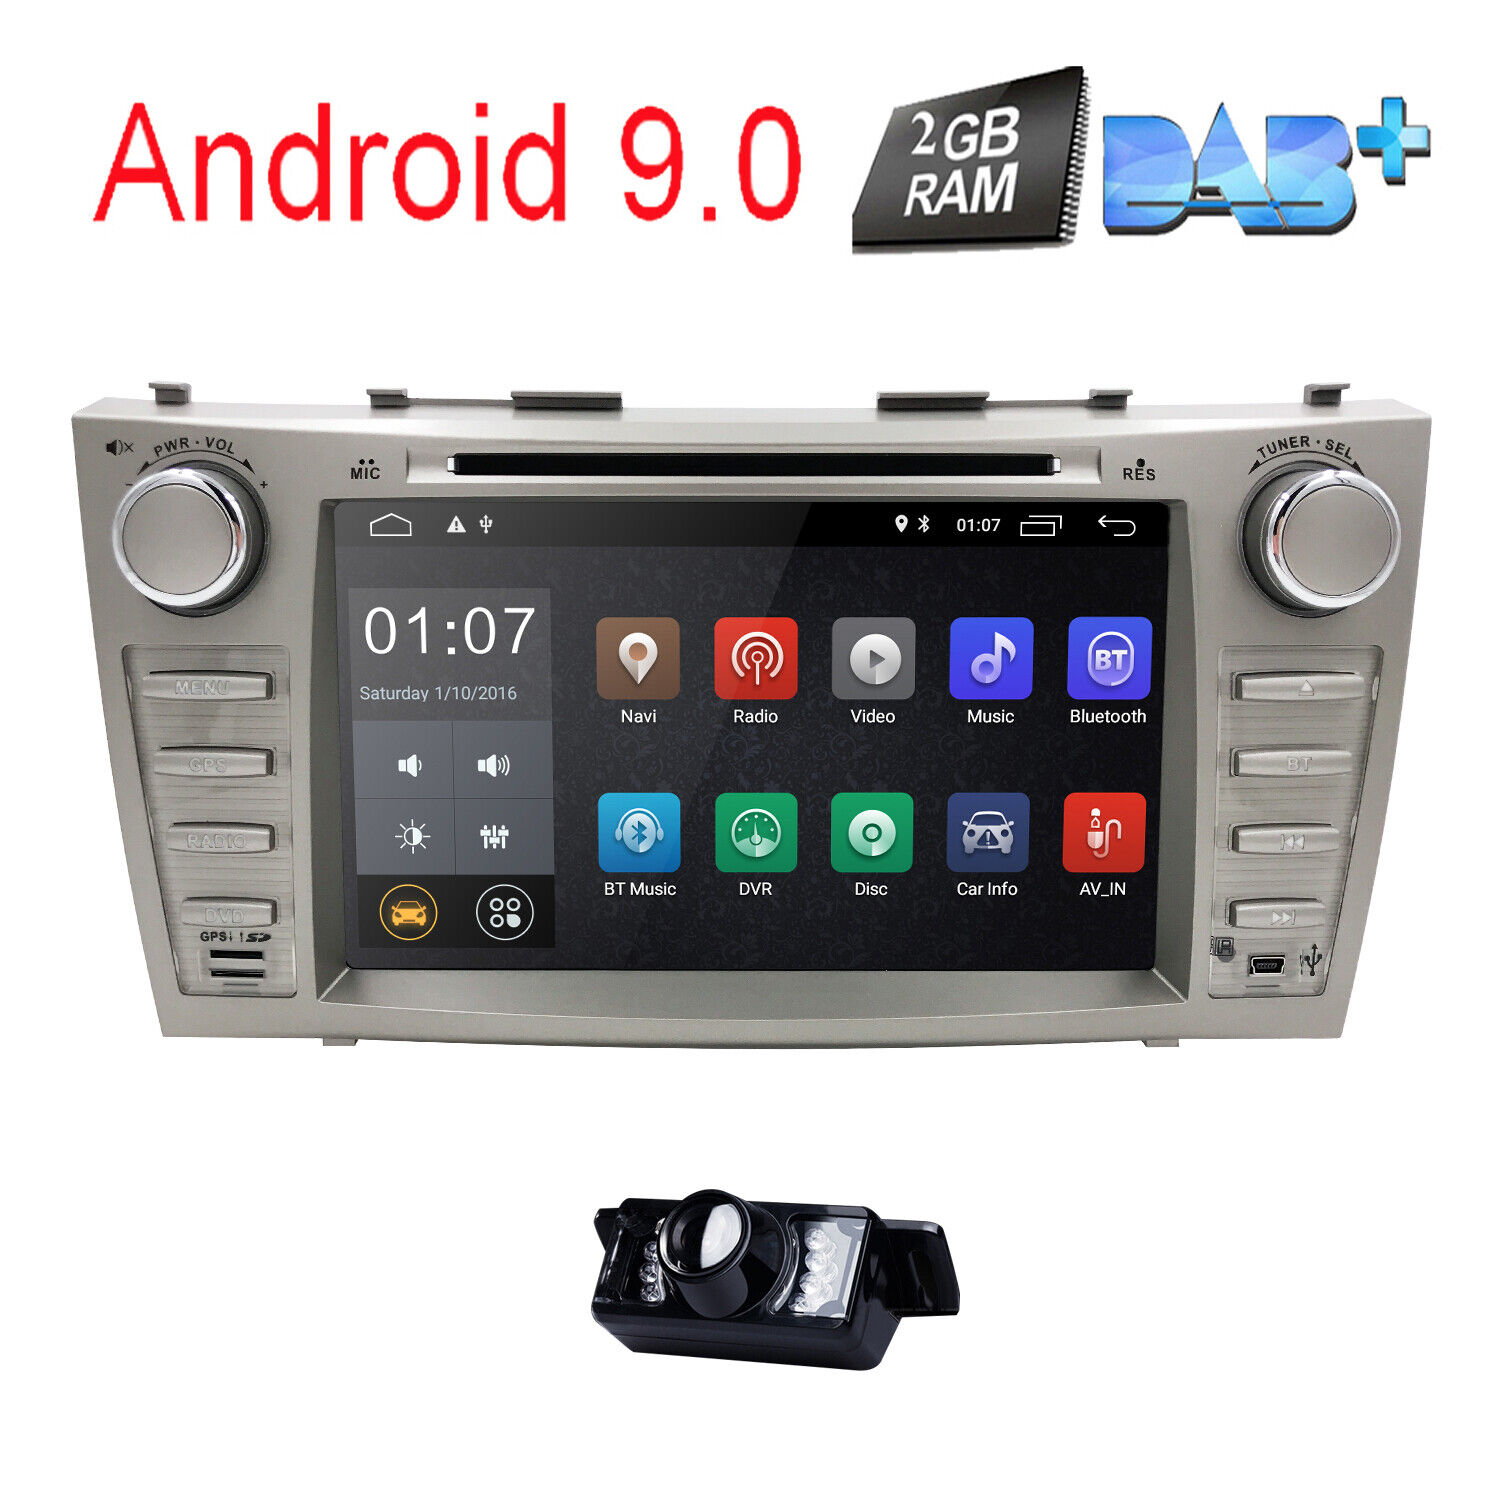 Android 9.0 Car Stereo Headunit GPS DVD WIFI+Bluetooth for TOYOTA CAMRY AURION